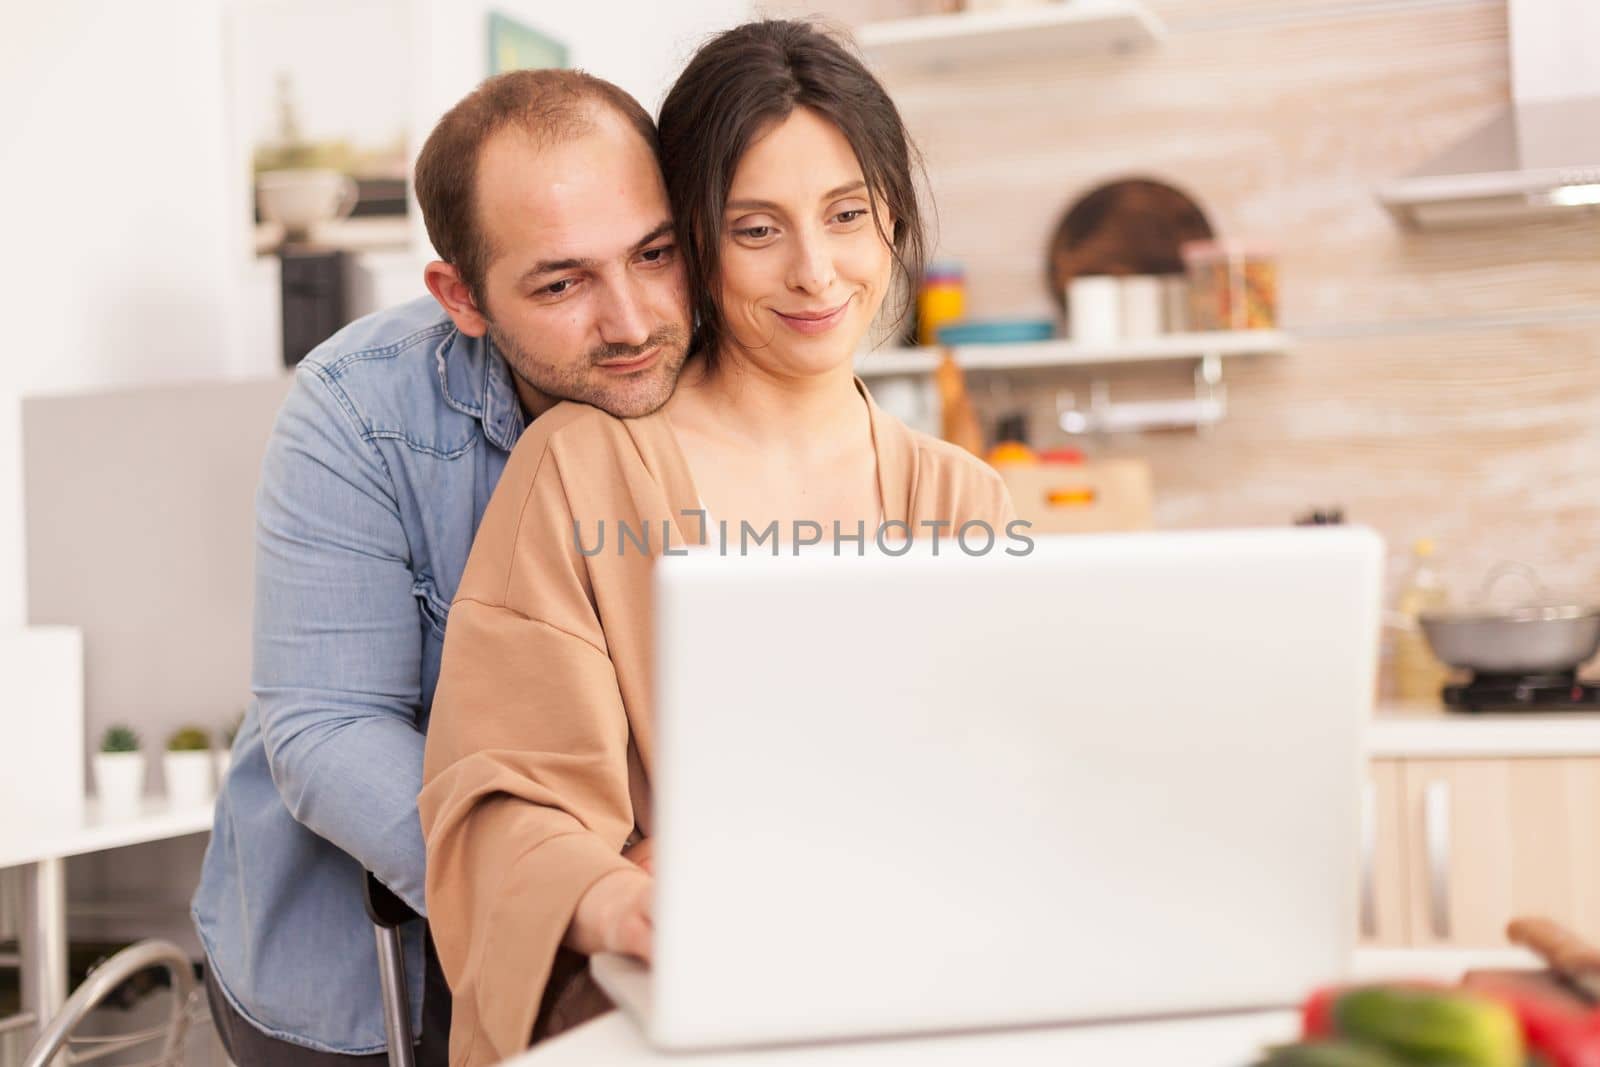 Smiling couple using laptop in kitchen. Man hugging wife. Happy loving cheerful romantic in love couple at home using modern wifi wireless internet technology